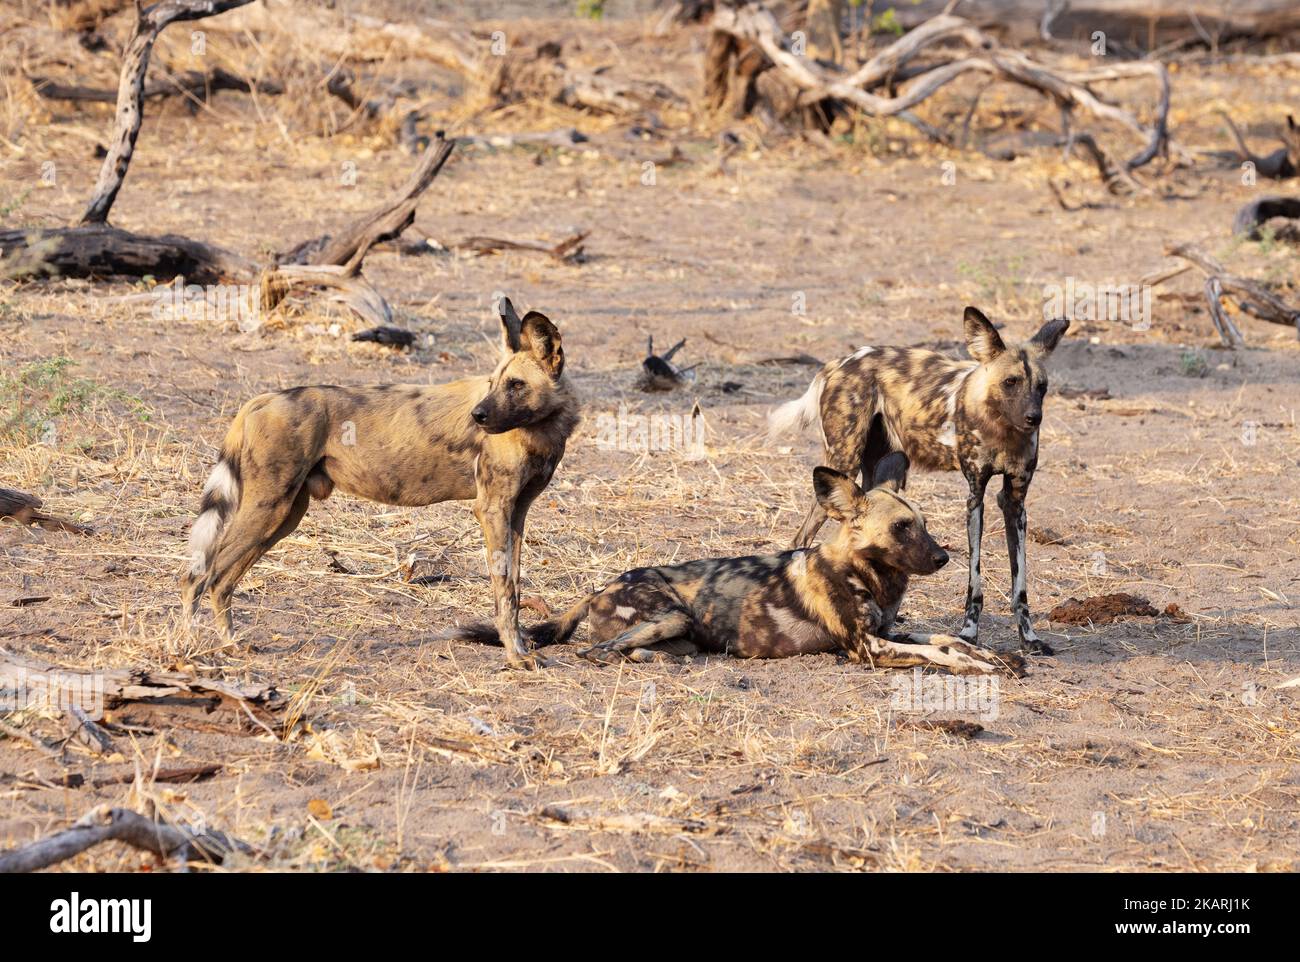 Small pack of three African Wild Dogs, Lycaon pictus, aka Painted Dog, Moremi Game Reserve, Botswana Africa. Africa wildlife. Stock Photo